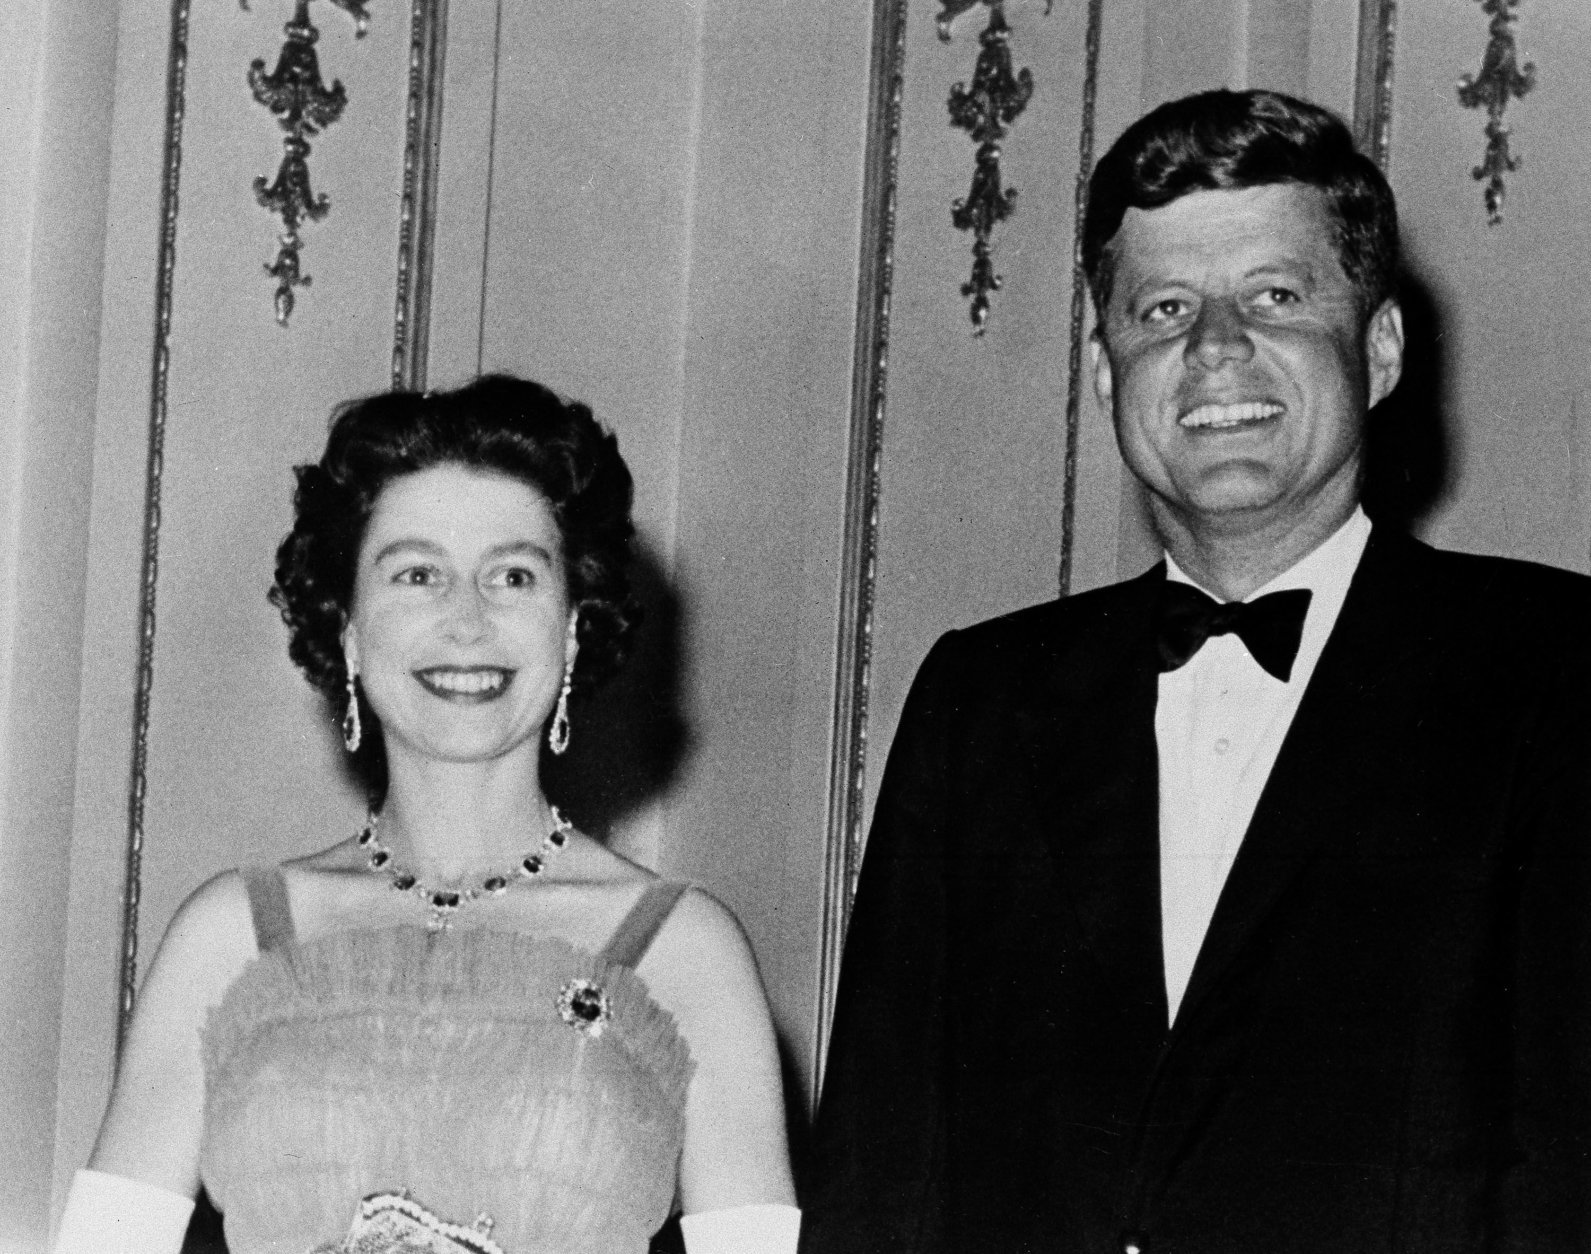 Queen Elizabeth II and President John Kennedy pose at Buckingham Palace in London, June 5, 1961.  The Kennedys were dinner guests of the Queen. (AP Photo)